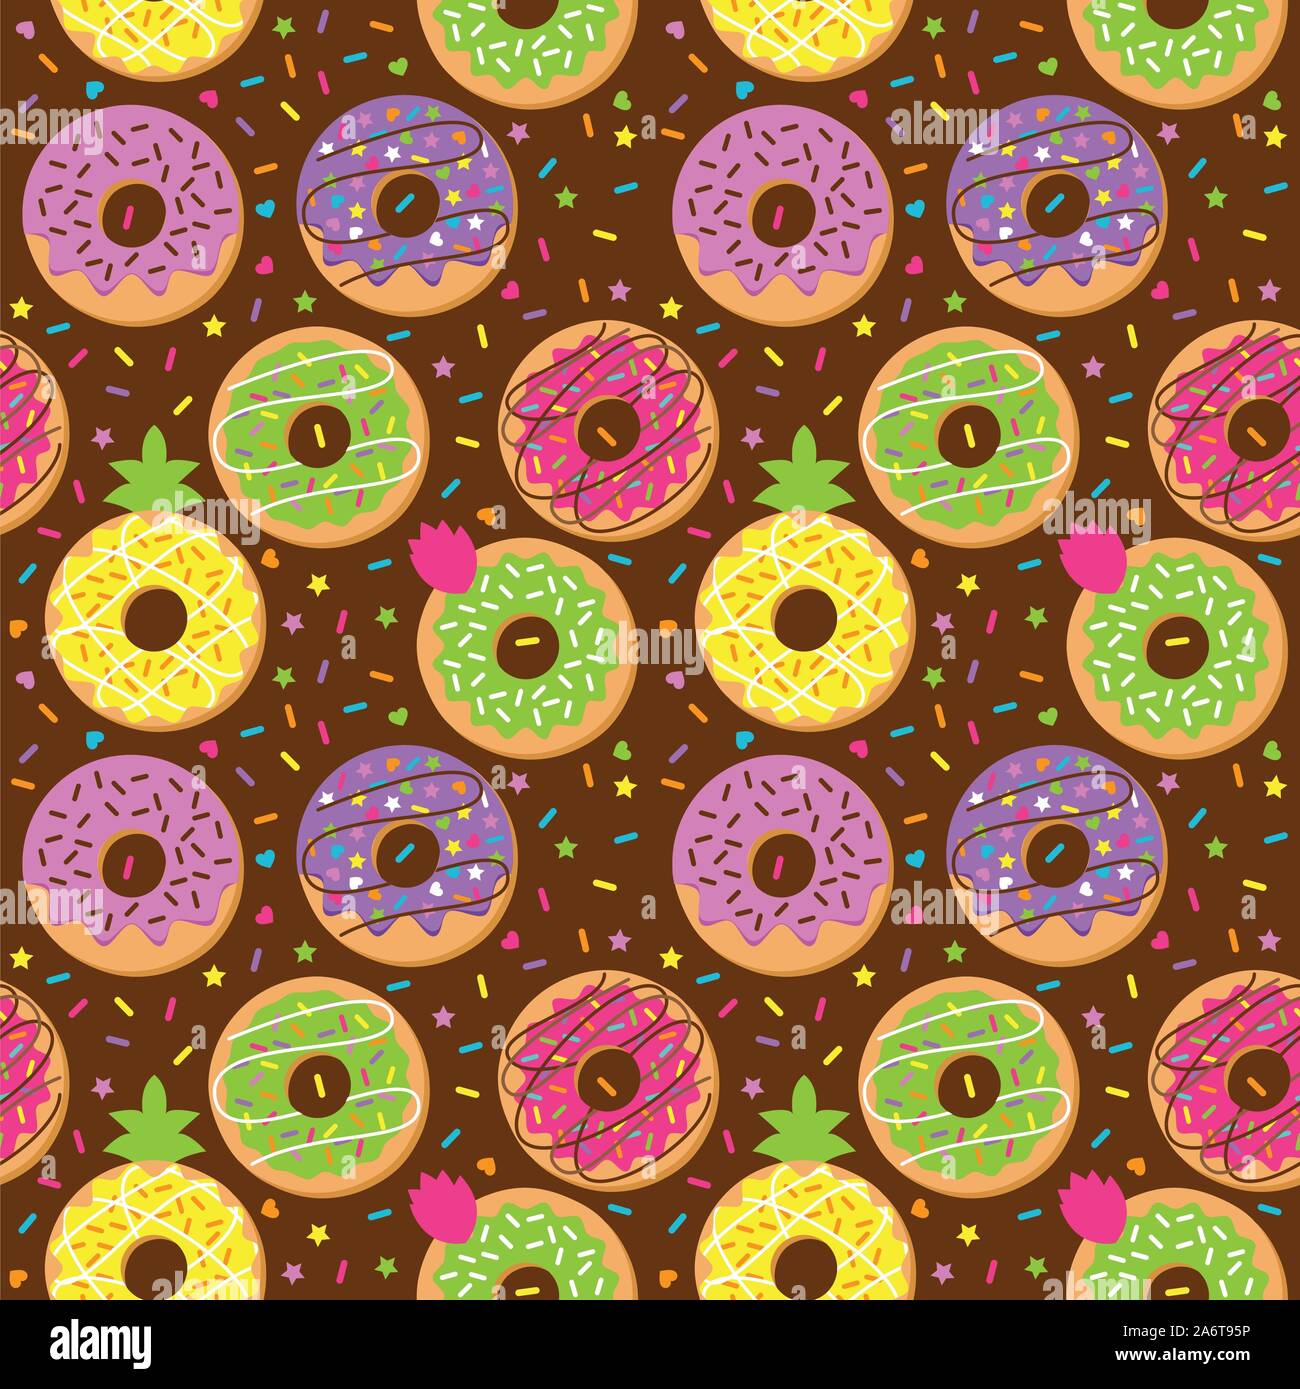 Seamless Vector Background with Doughnuts and Sprinkles Stock Vector